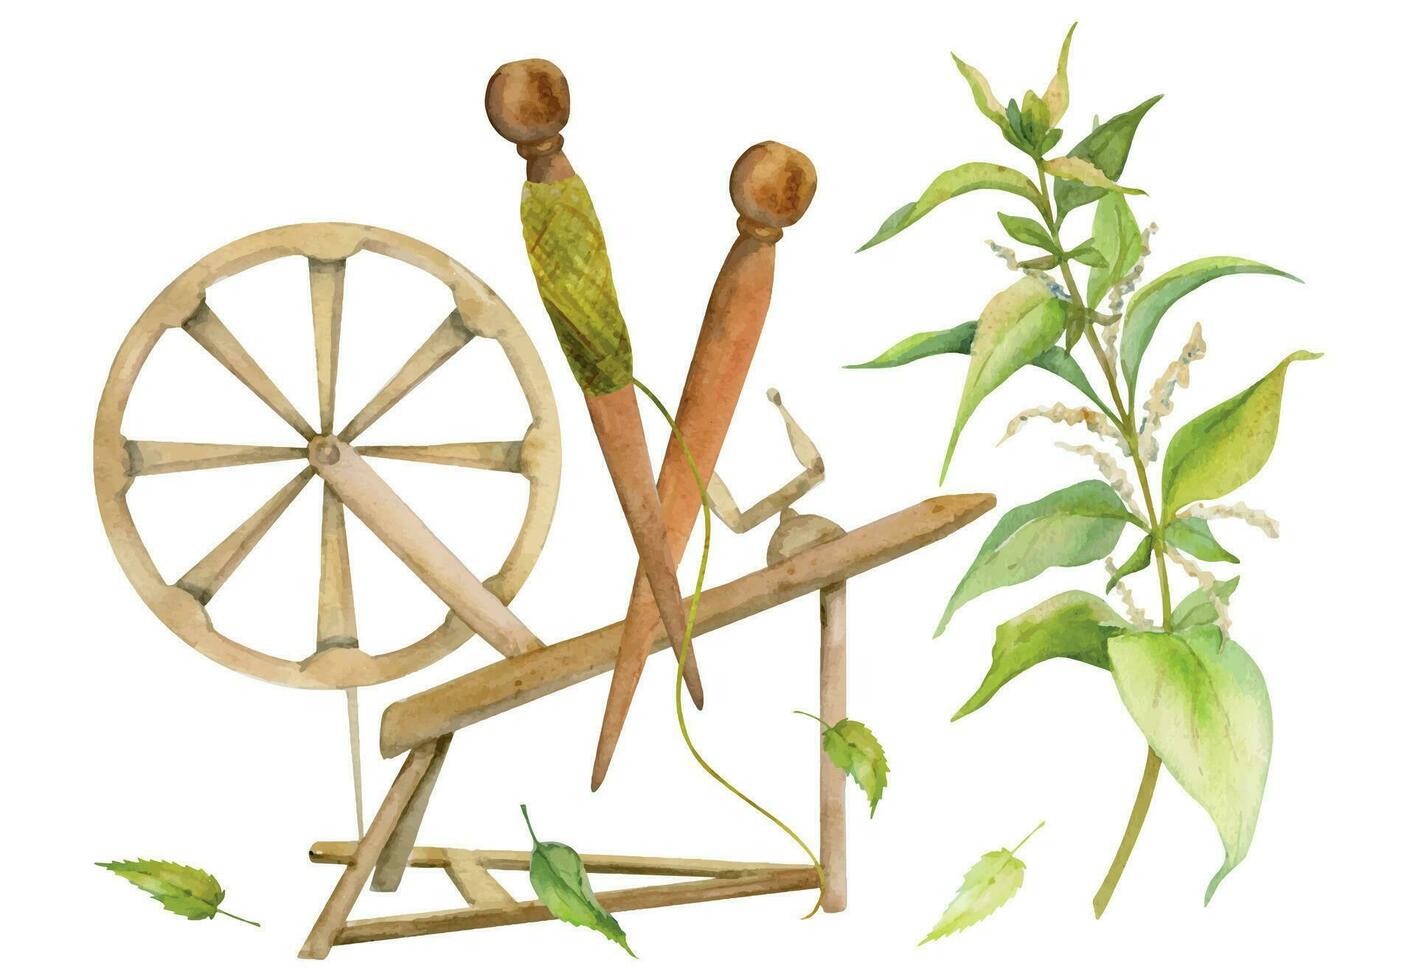 Hand drawn watercolor spinning wheel, spindle with thread and nettle. Natural plant. Botanical illustration isolated object composition on white background. For shop logo print, website, card, booklet vector